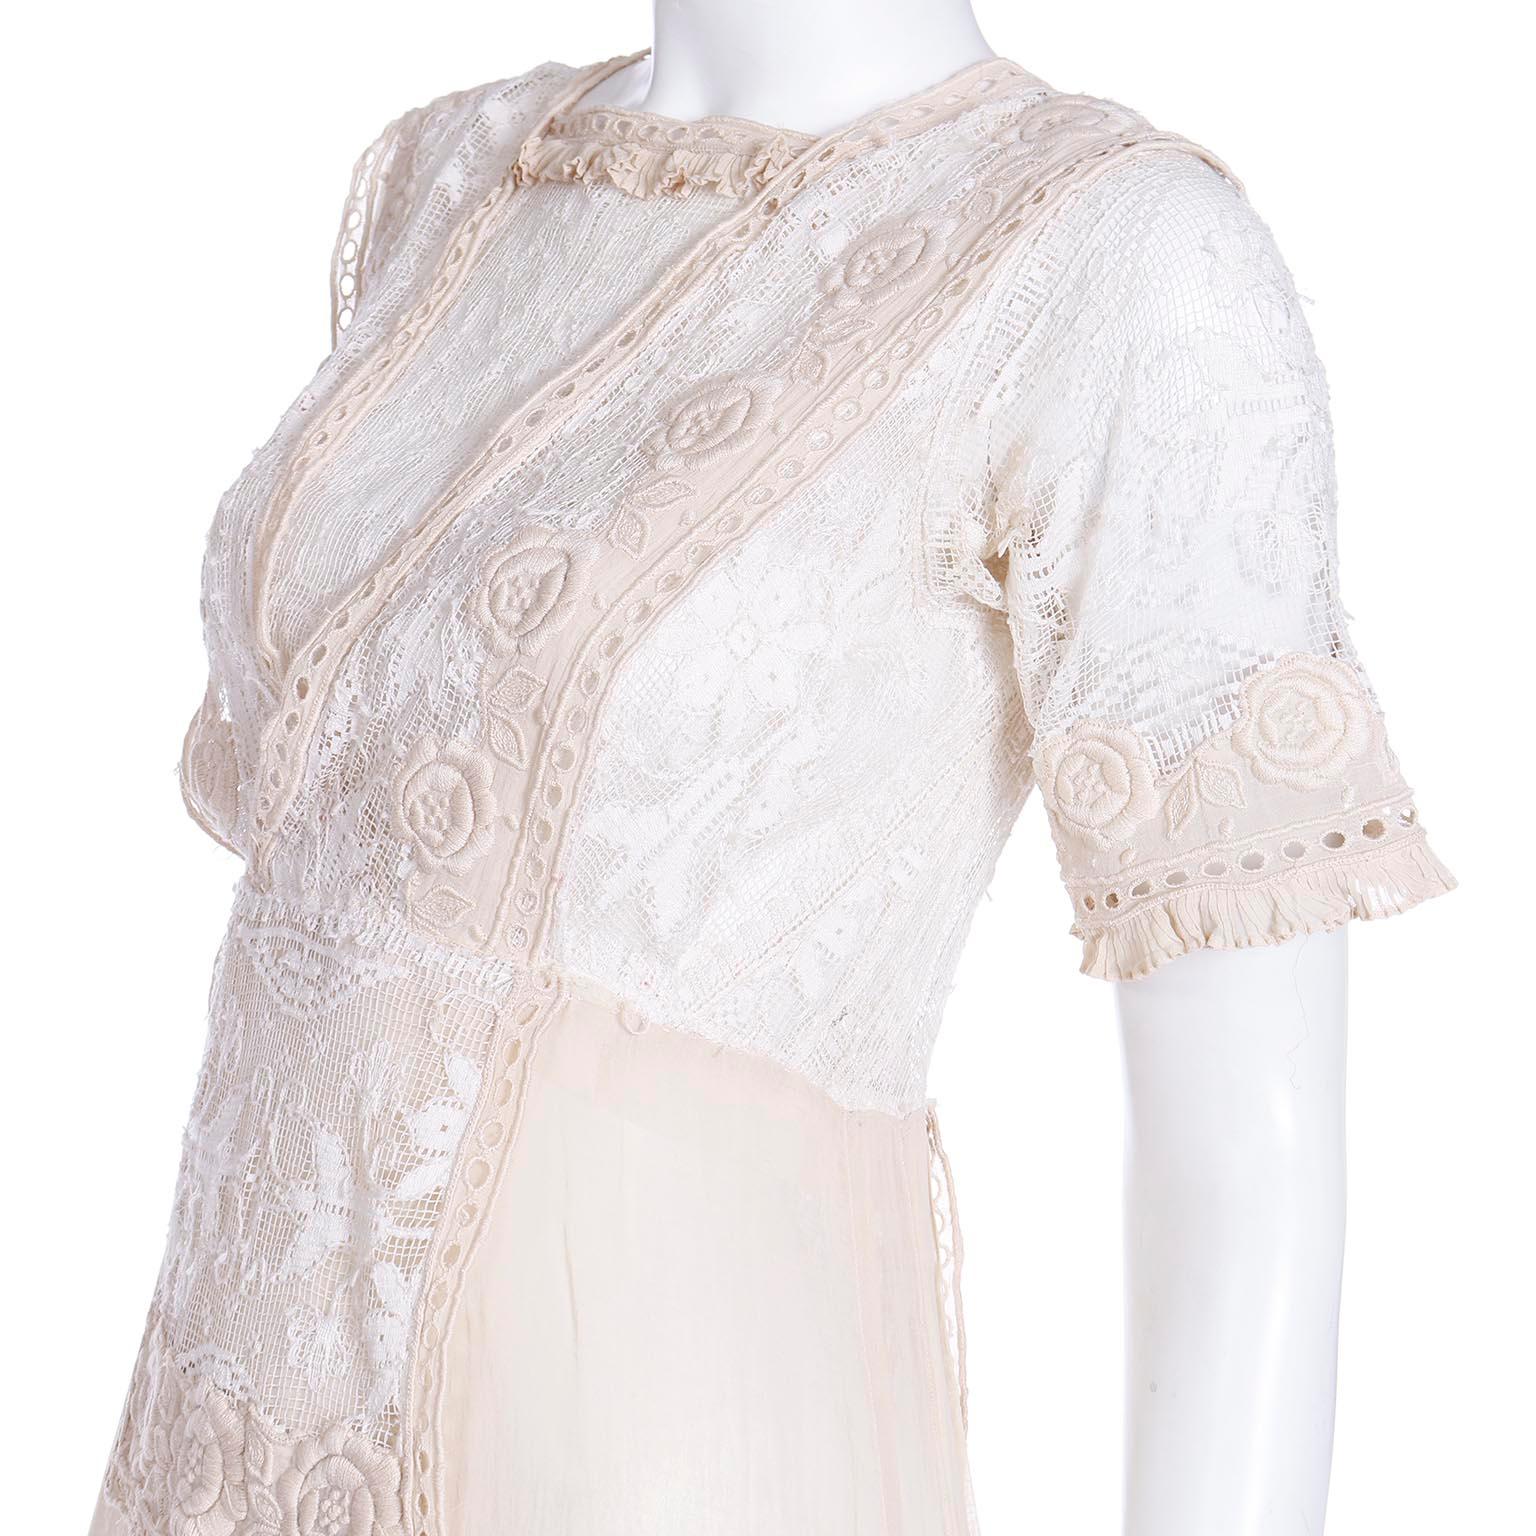 Vintage Edwardian Lawn Dress With Lace & Floral Embroidery 3